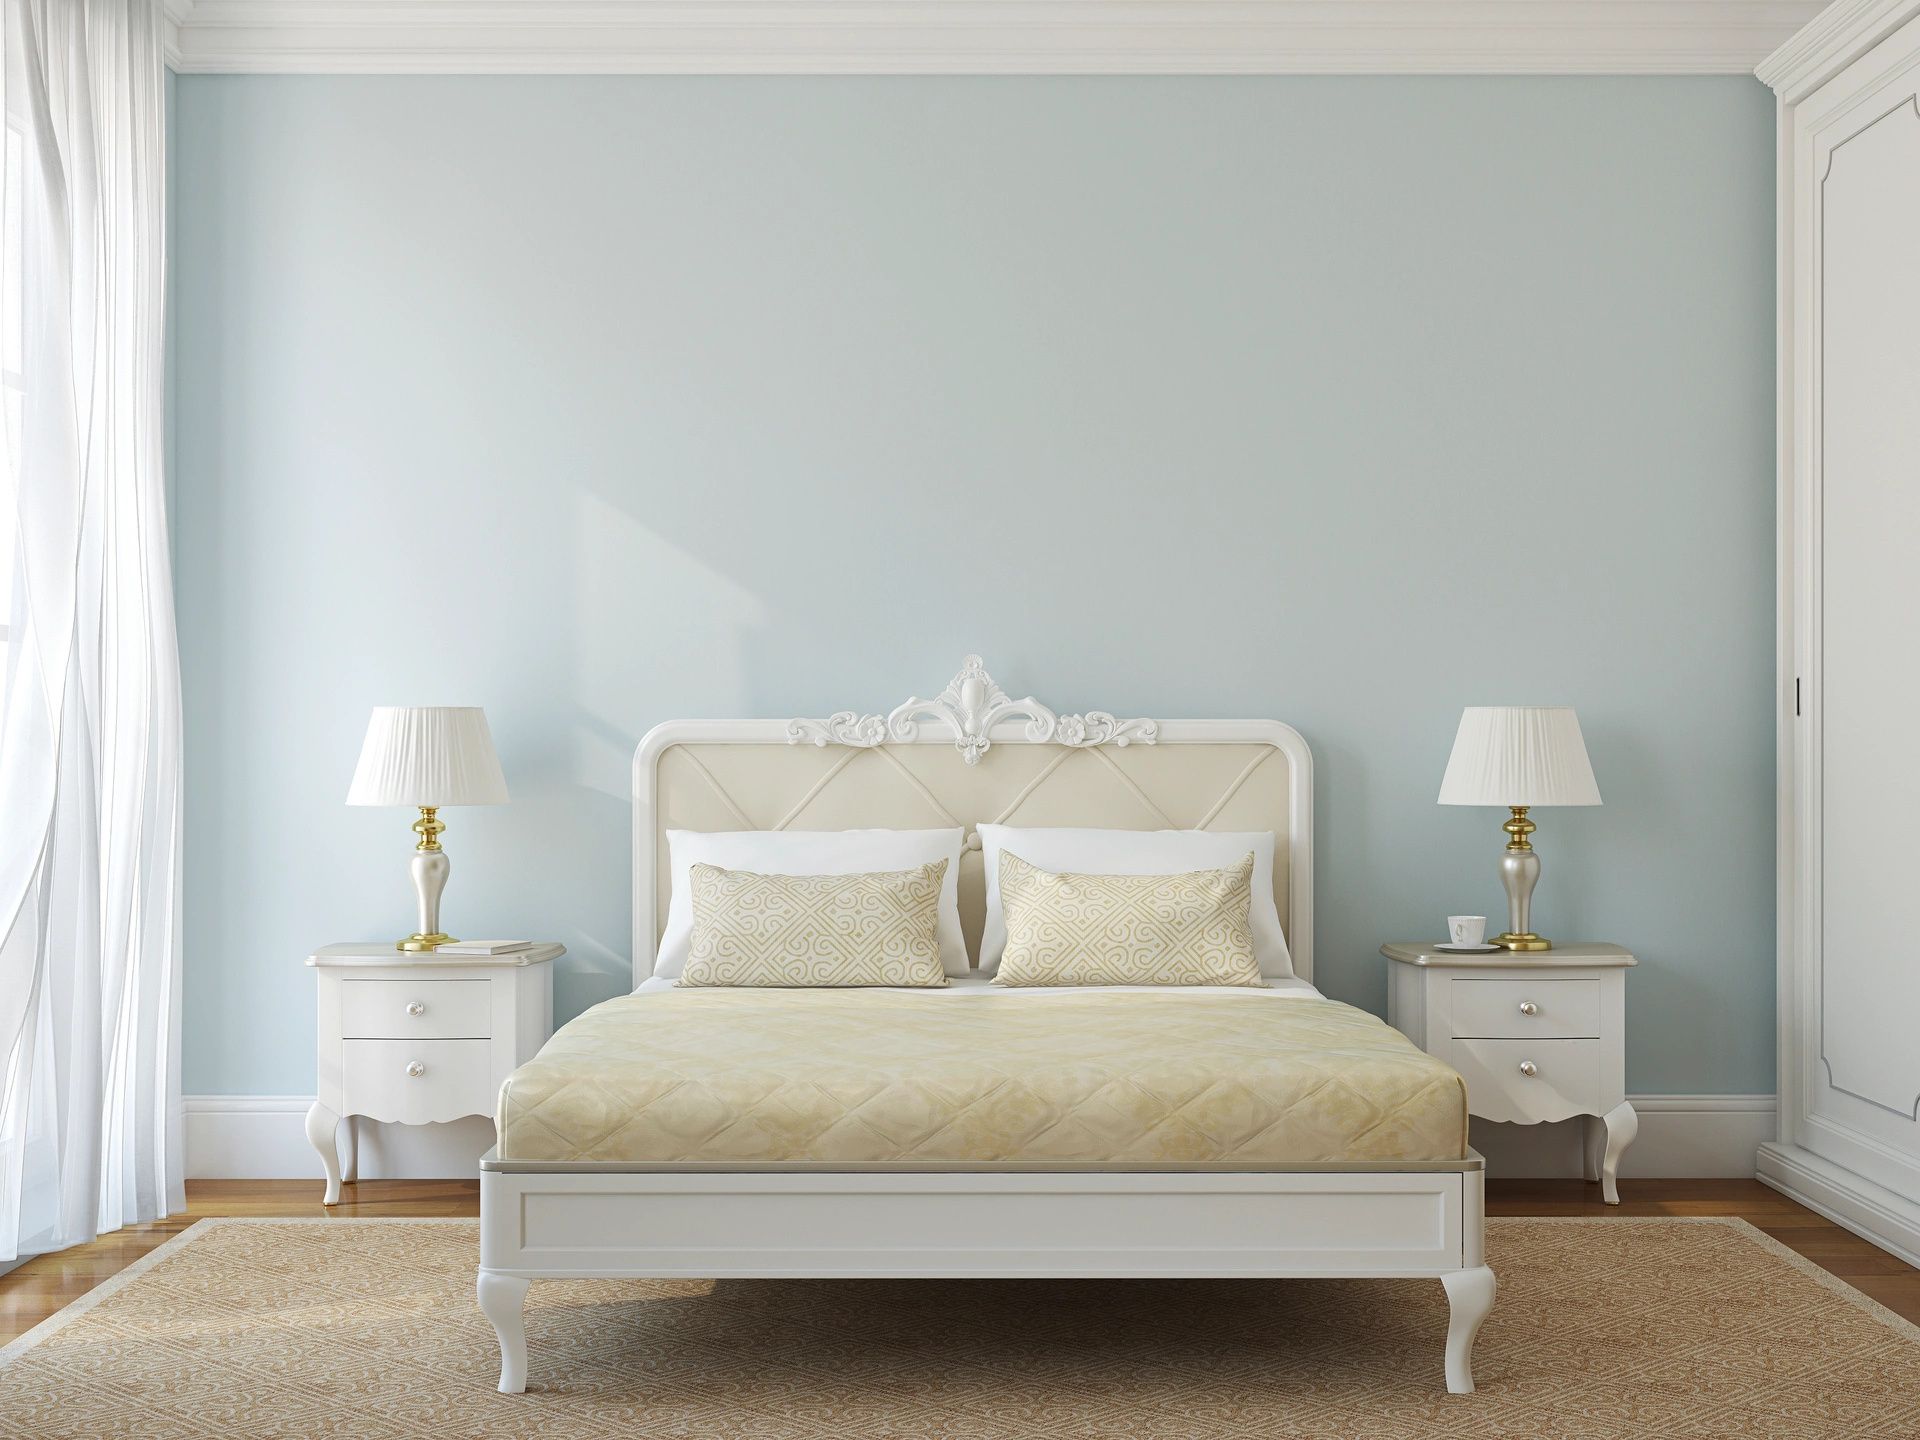 3 Tips For Choosing A New Bed